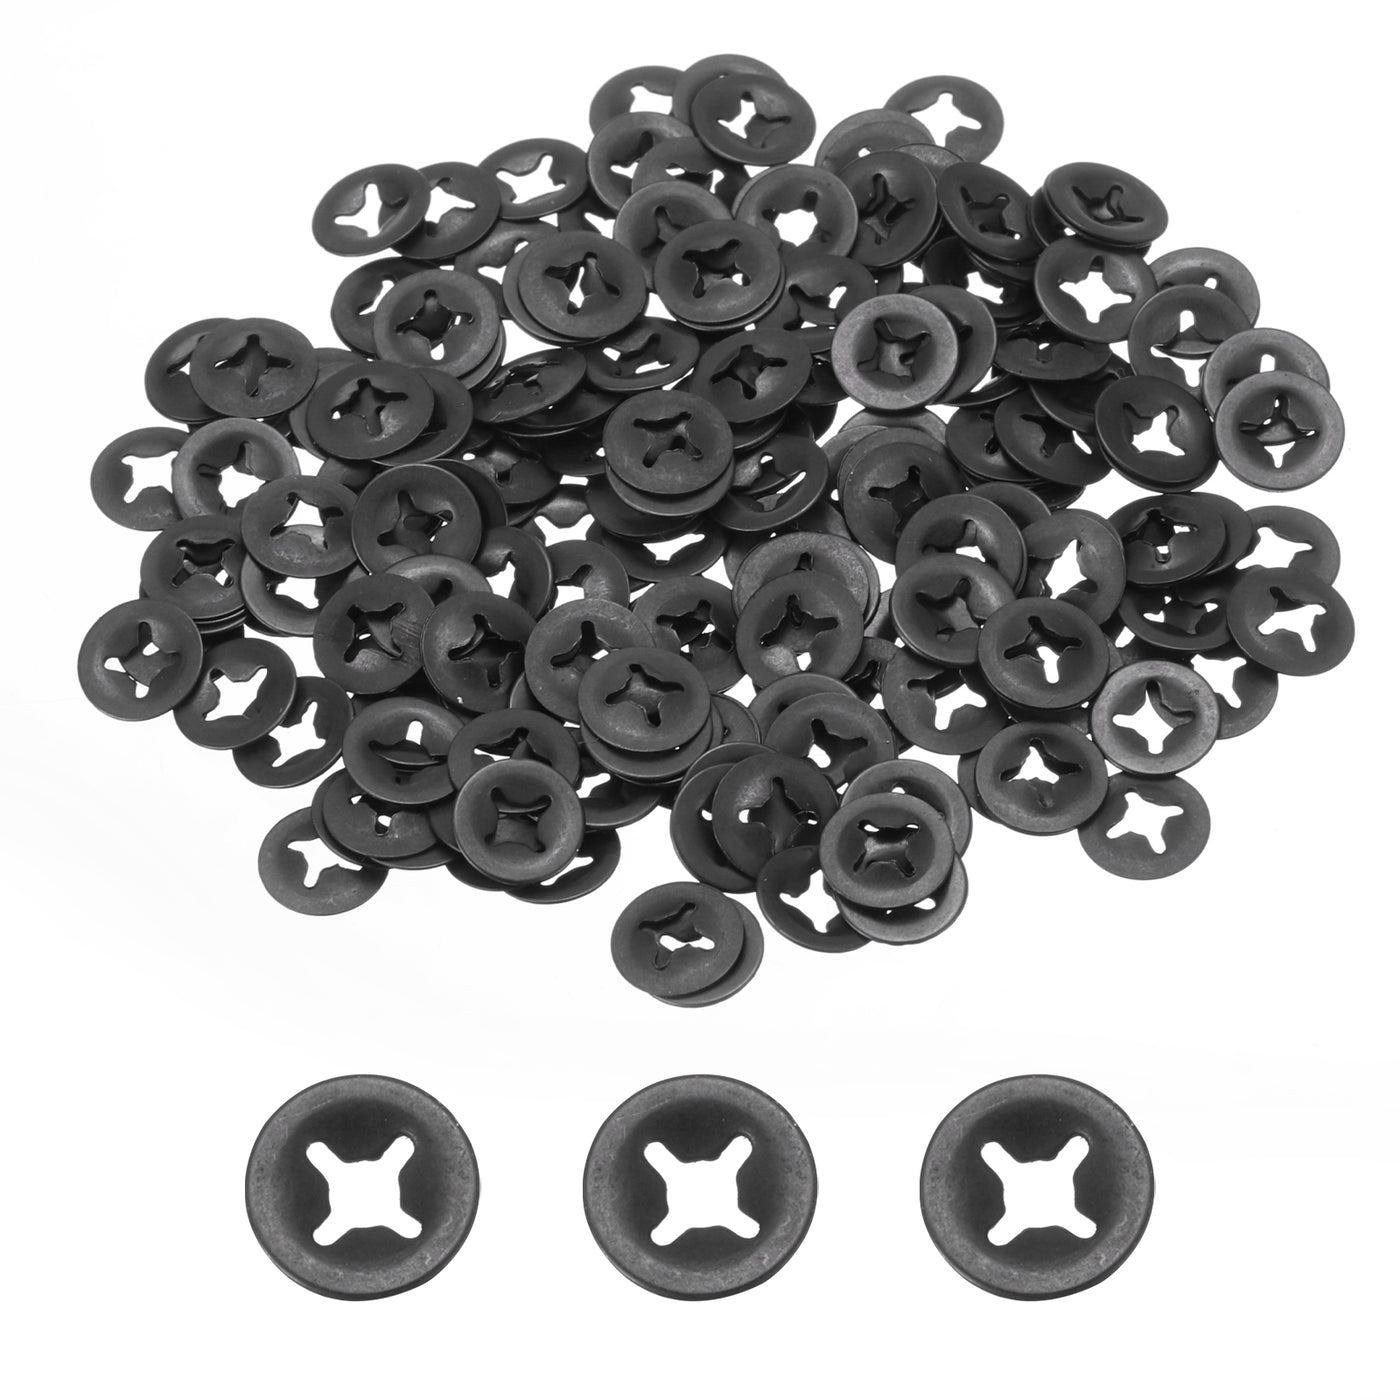 uxcell Uxcell 200pcs Internal Tooth Star Lock Washers M2 Push on Retaining Clips Quick Speed Locking Washers, 65Mn Steel Starlock Push Nuts